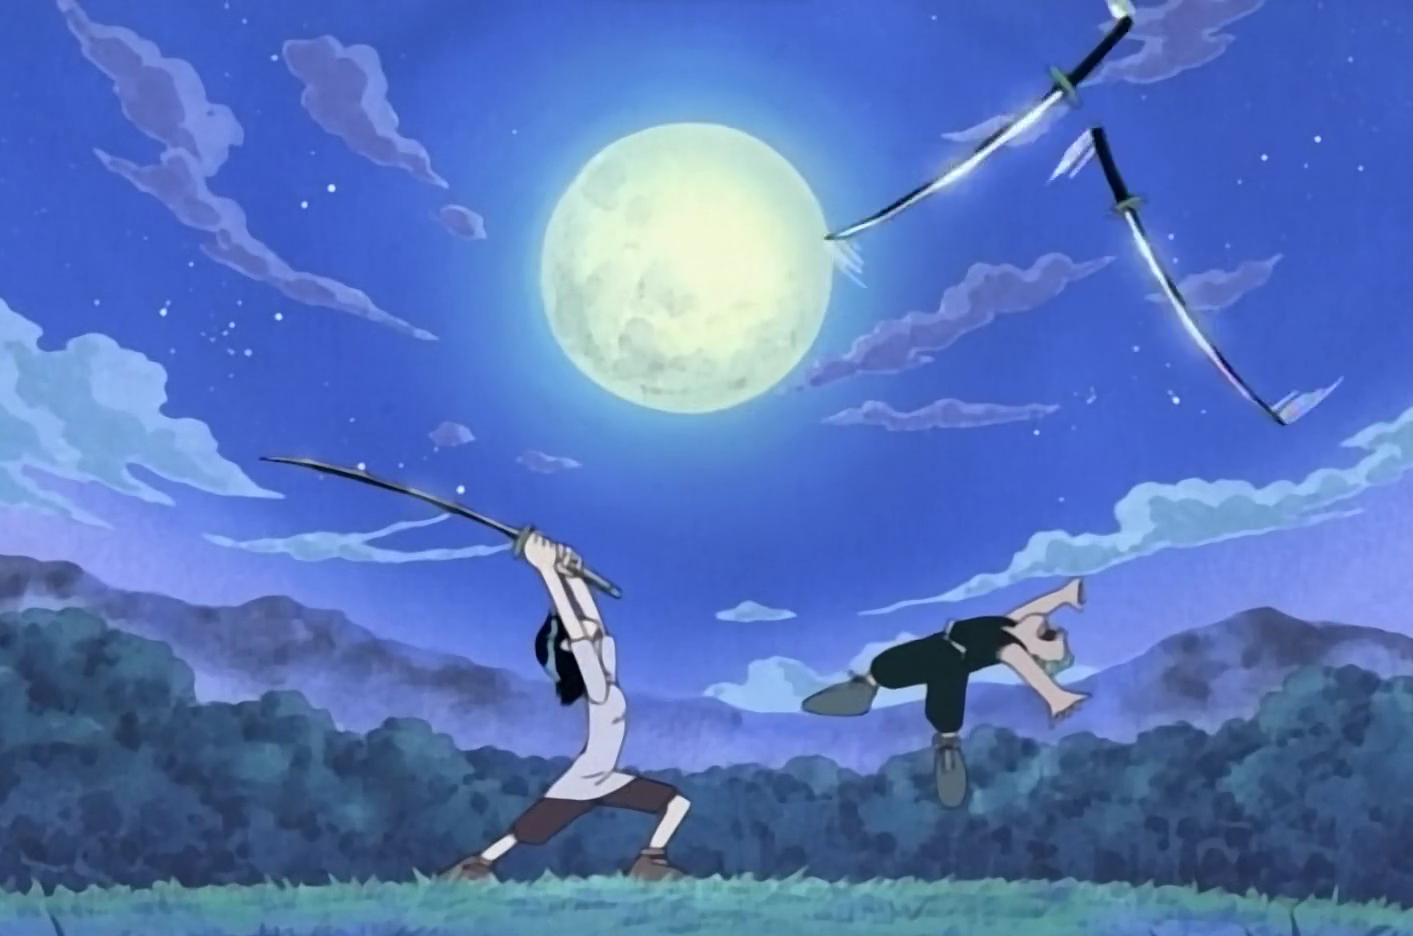 One Piece Kuina Defeats Zoro as a kid once again